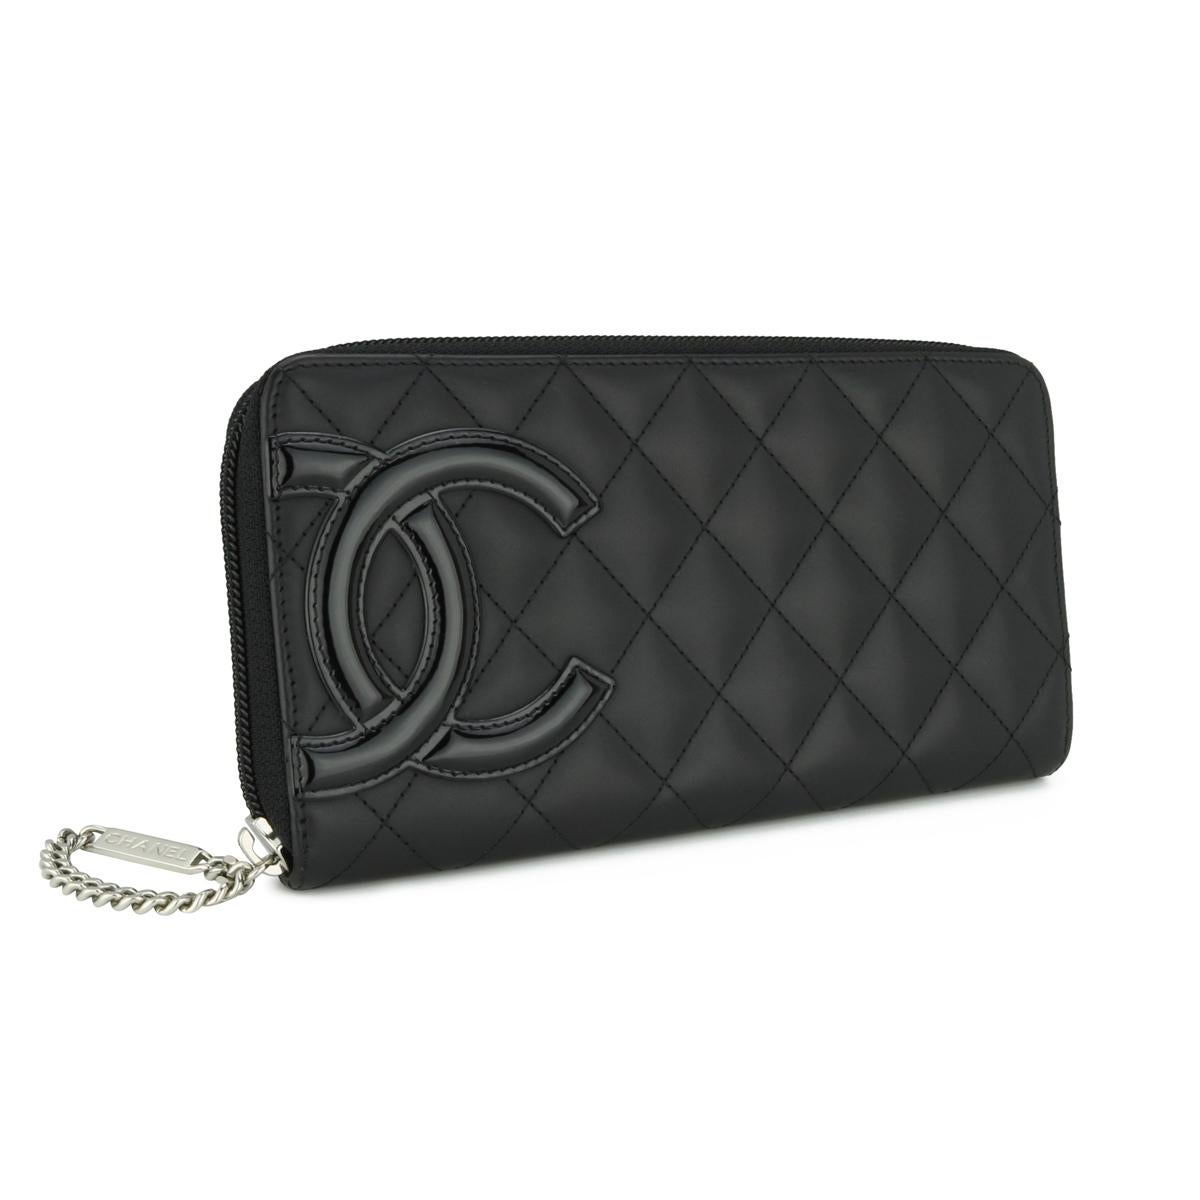 Chanel Quilted Cambon Long Zip Wallet Black Calfskin with Silver Hardware 2014 In Good Condition For Sale In Huddersfield, GB